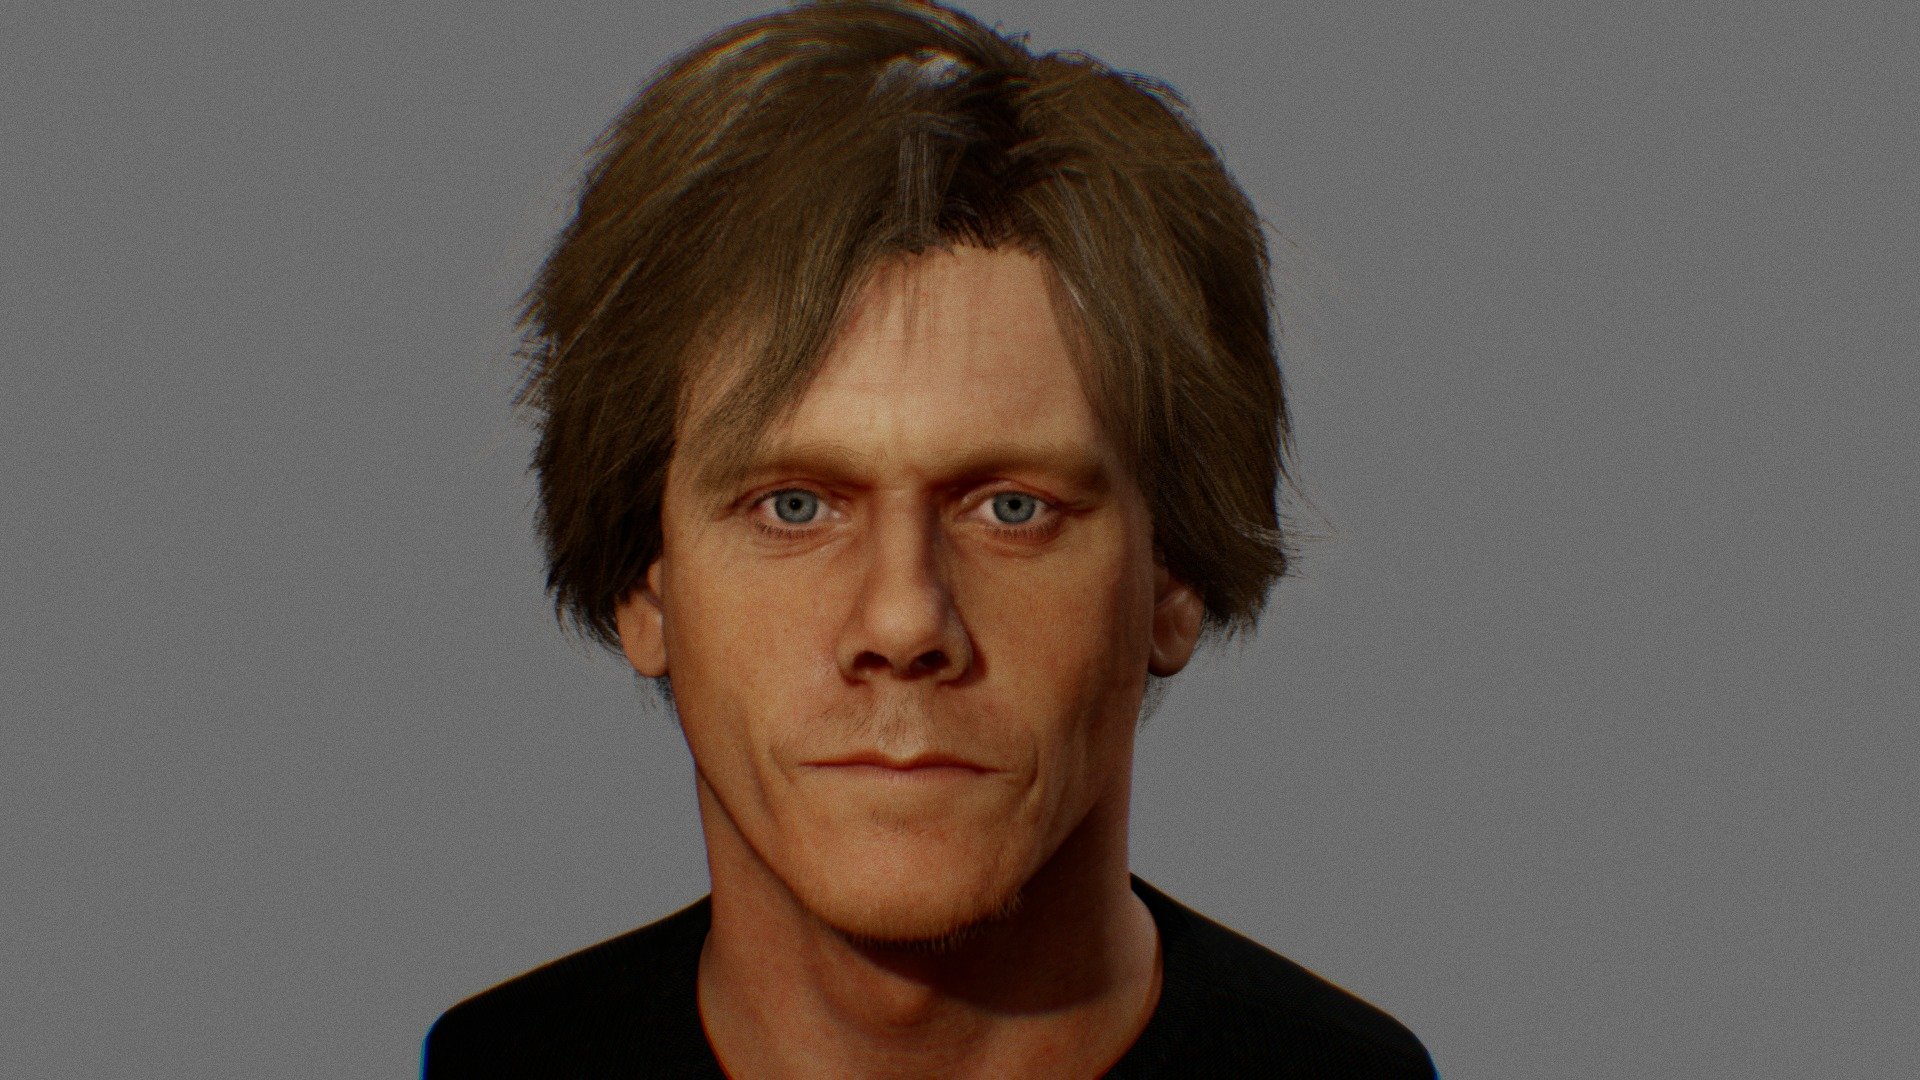 modeled for fun!) - Kevin Bacon - 3D model by irakli_chkonia 3d model